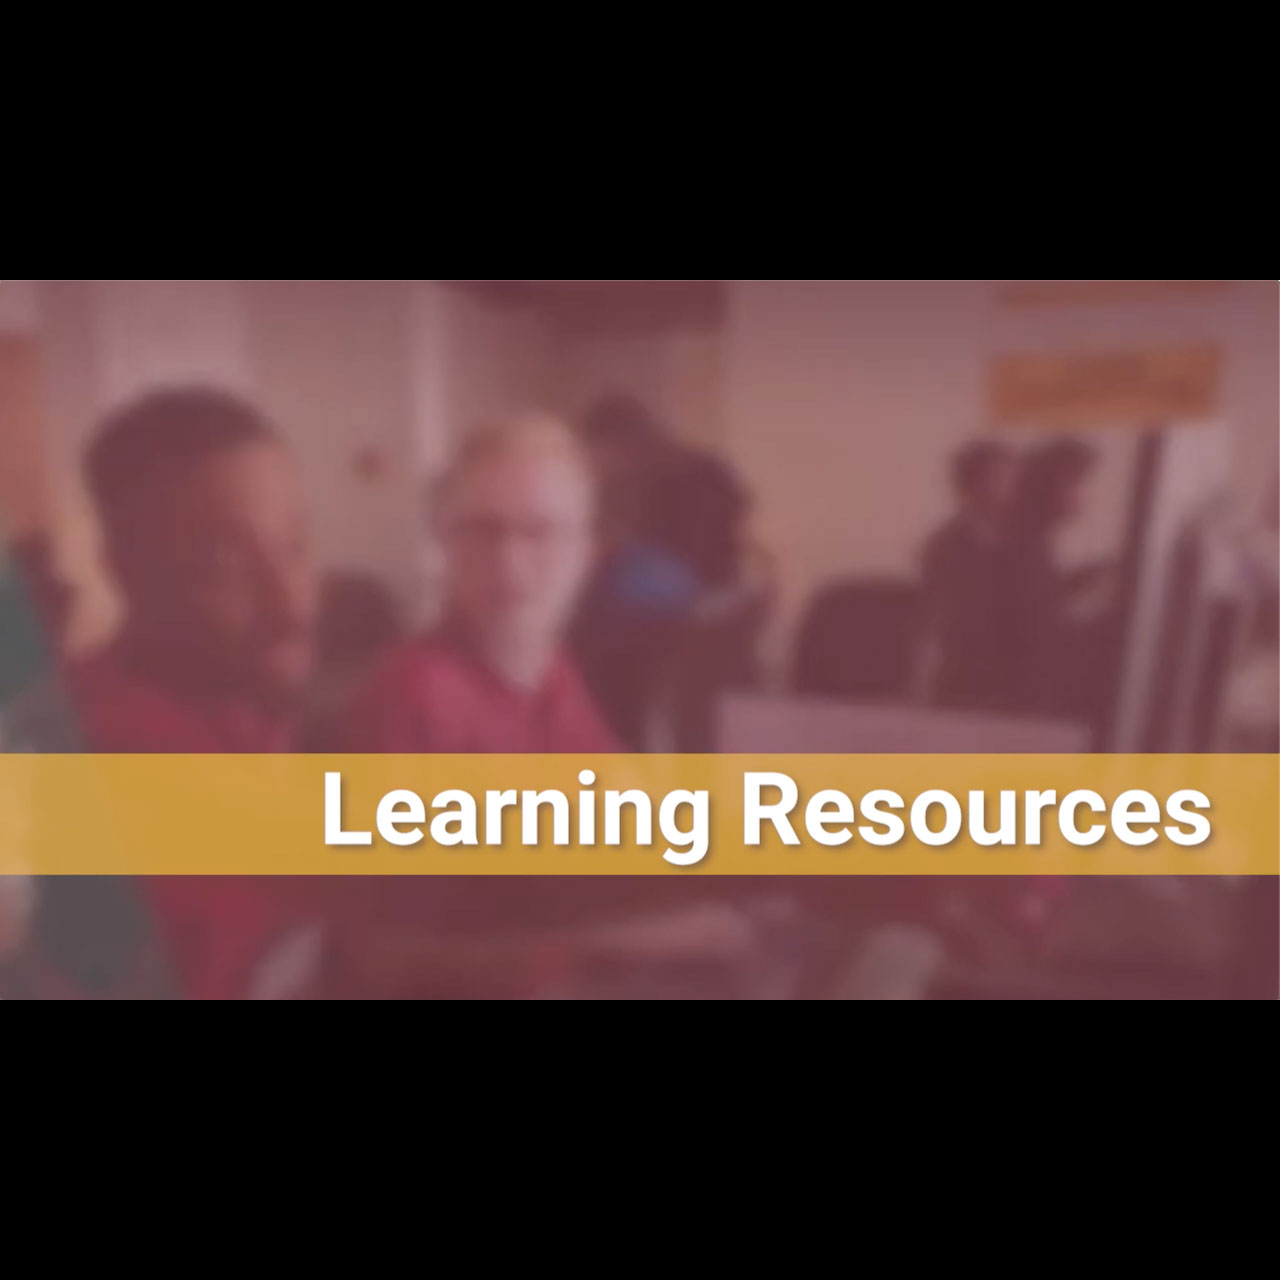 A presentation slide that says "Learning Resources."